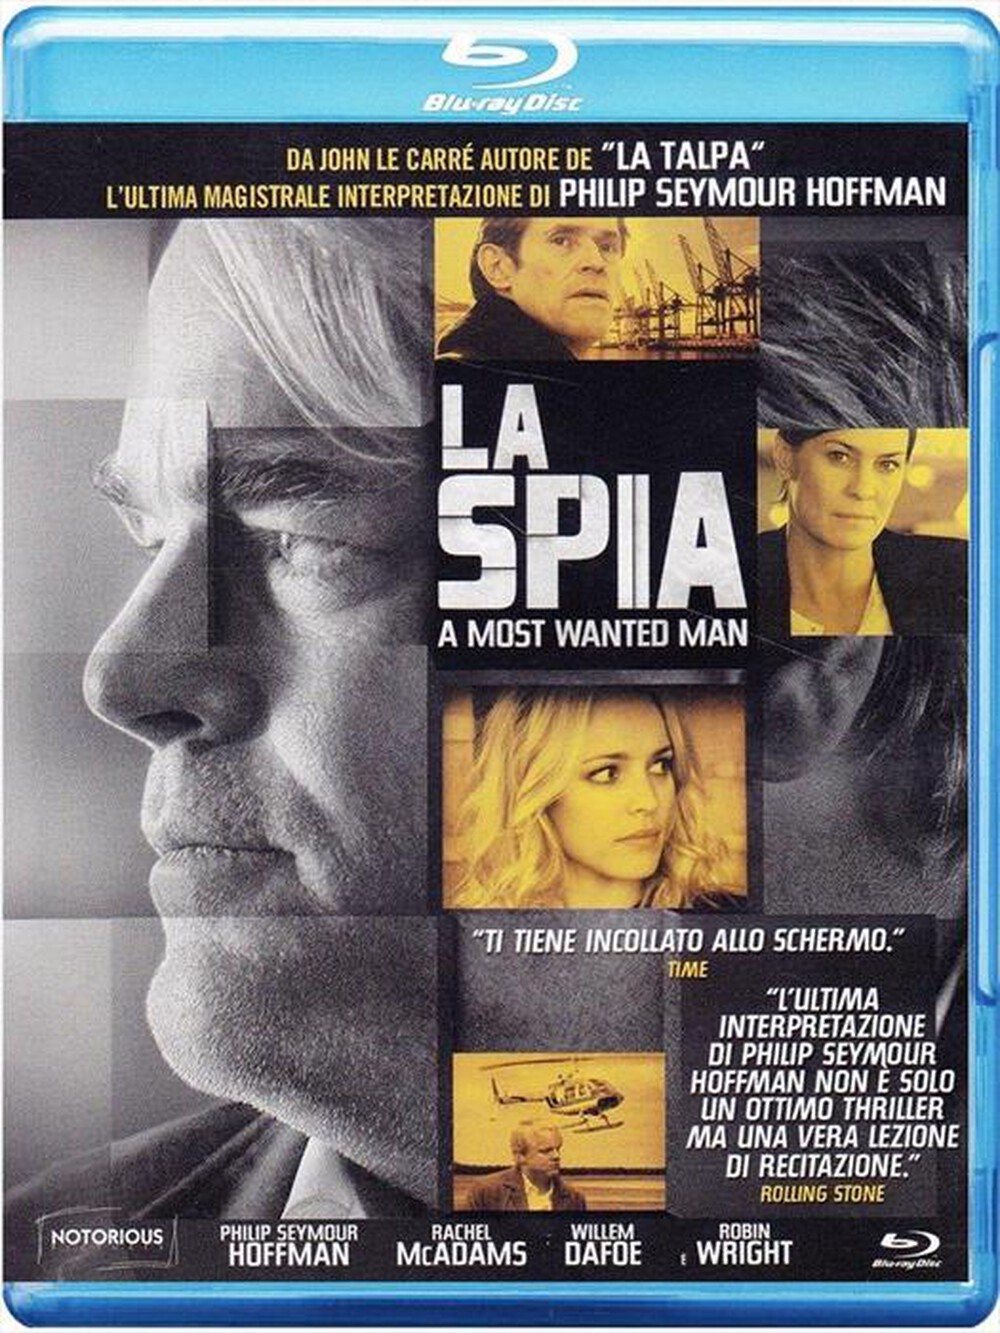 "EAGLE PICTURES - Spia (La) - A Most Wanted Man"